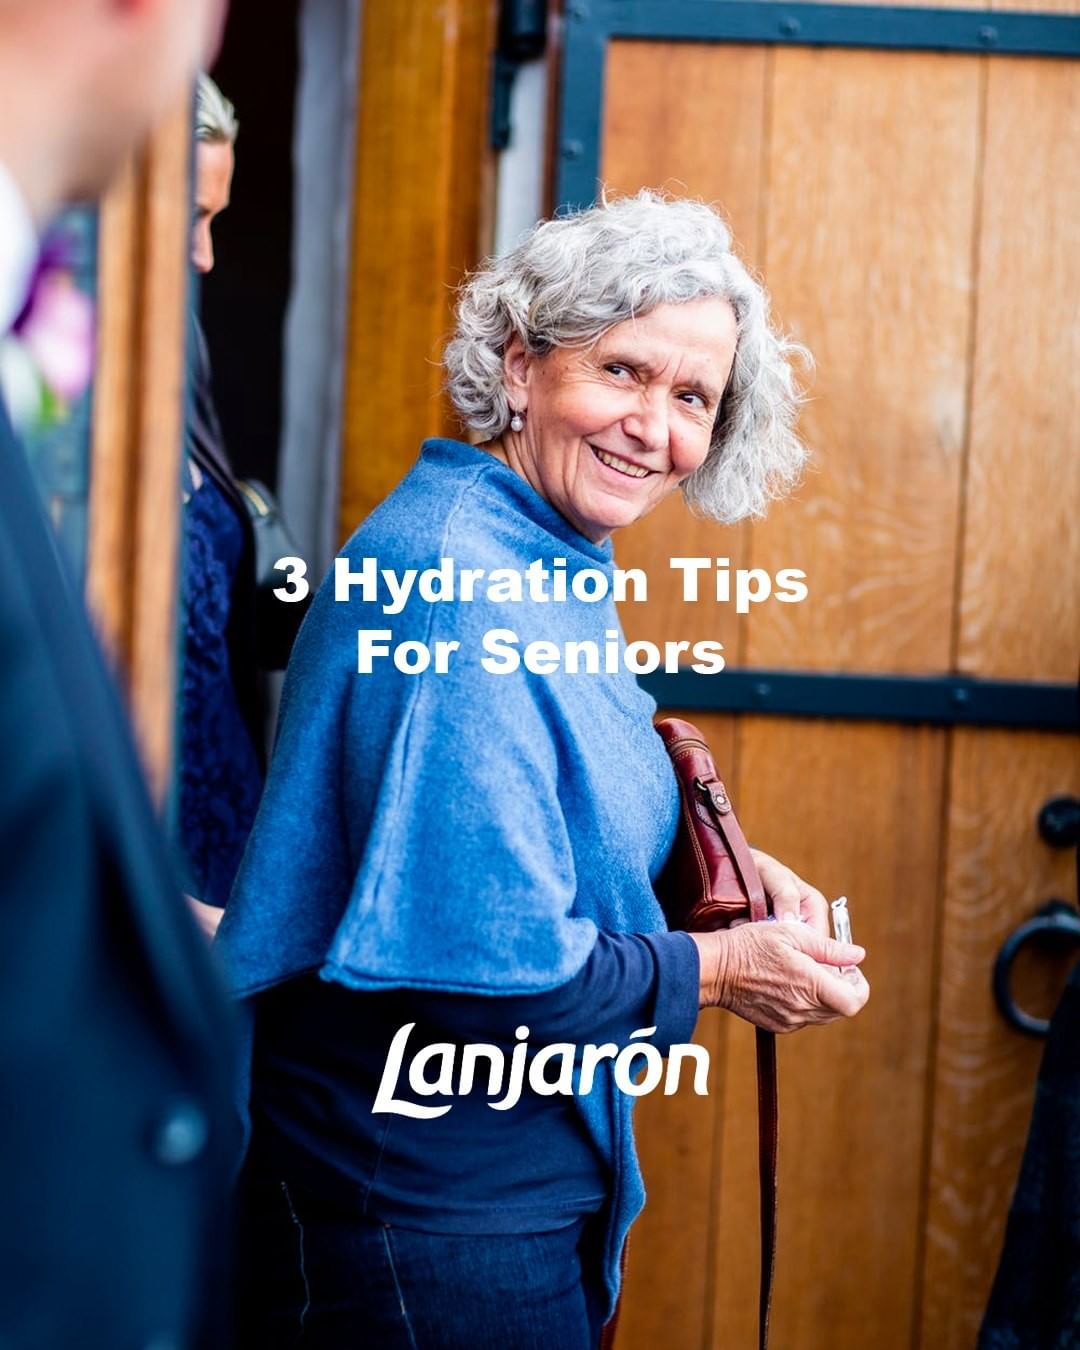 1. Old age can diminish the sensation for thirst. By the time senior feel that they need to drink water, they will be far too dehydrated and their health is negatively affected.